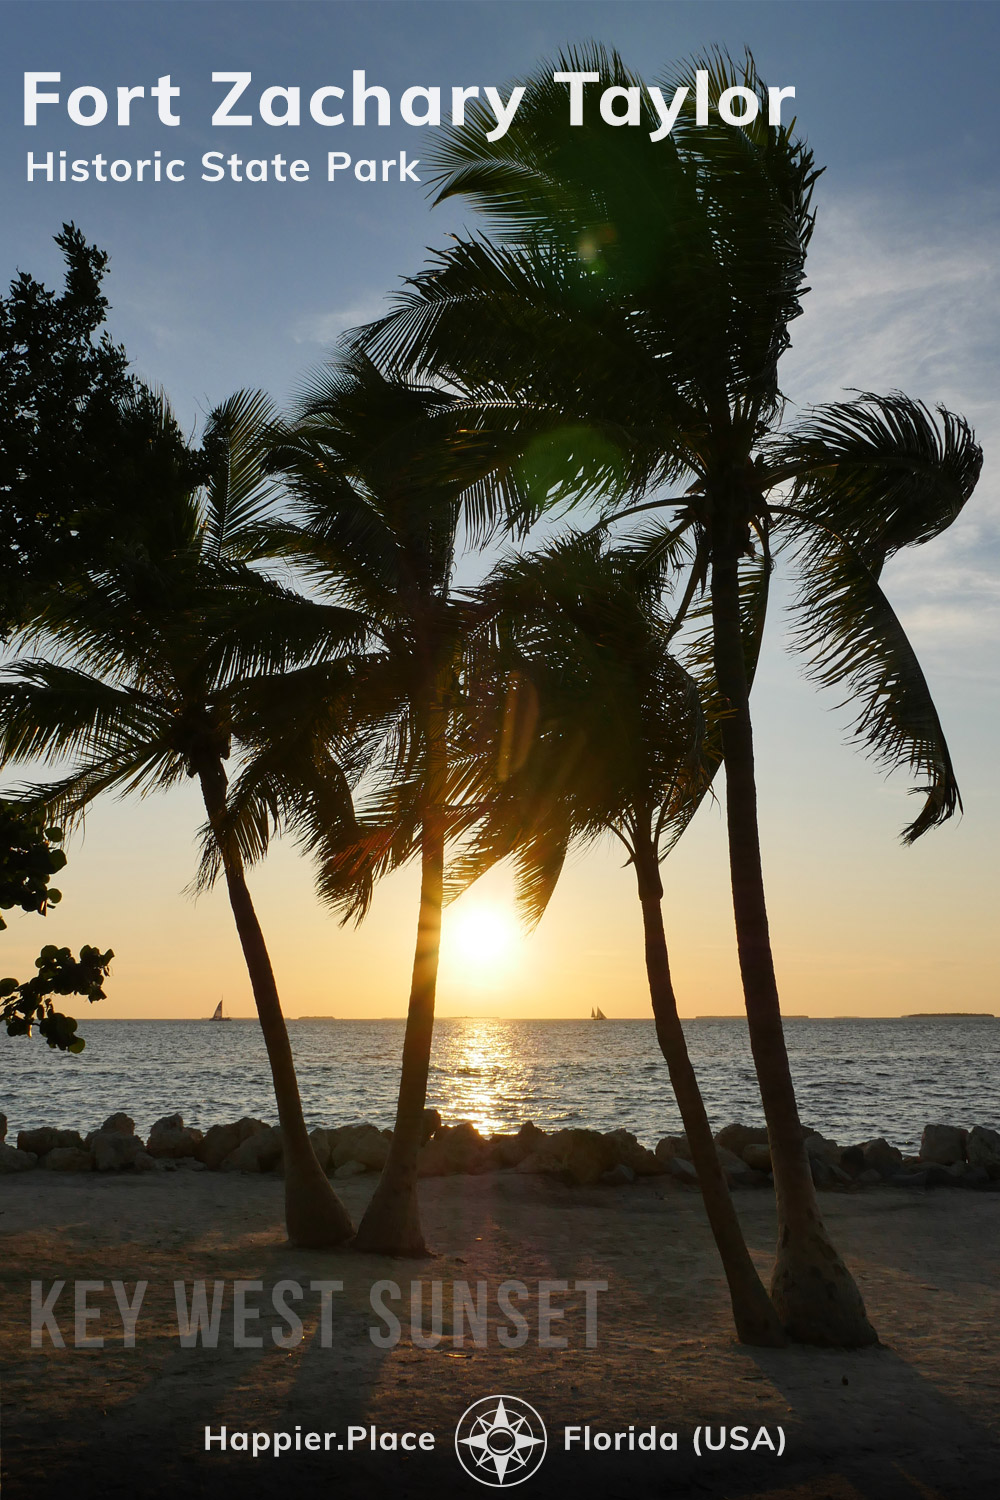 Key West Sunset through wind-swept Palm Trees at Fort Zachary Taylor Historic State Park, Happier Place, Florida